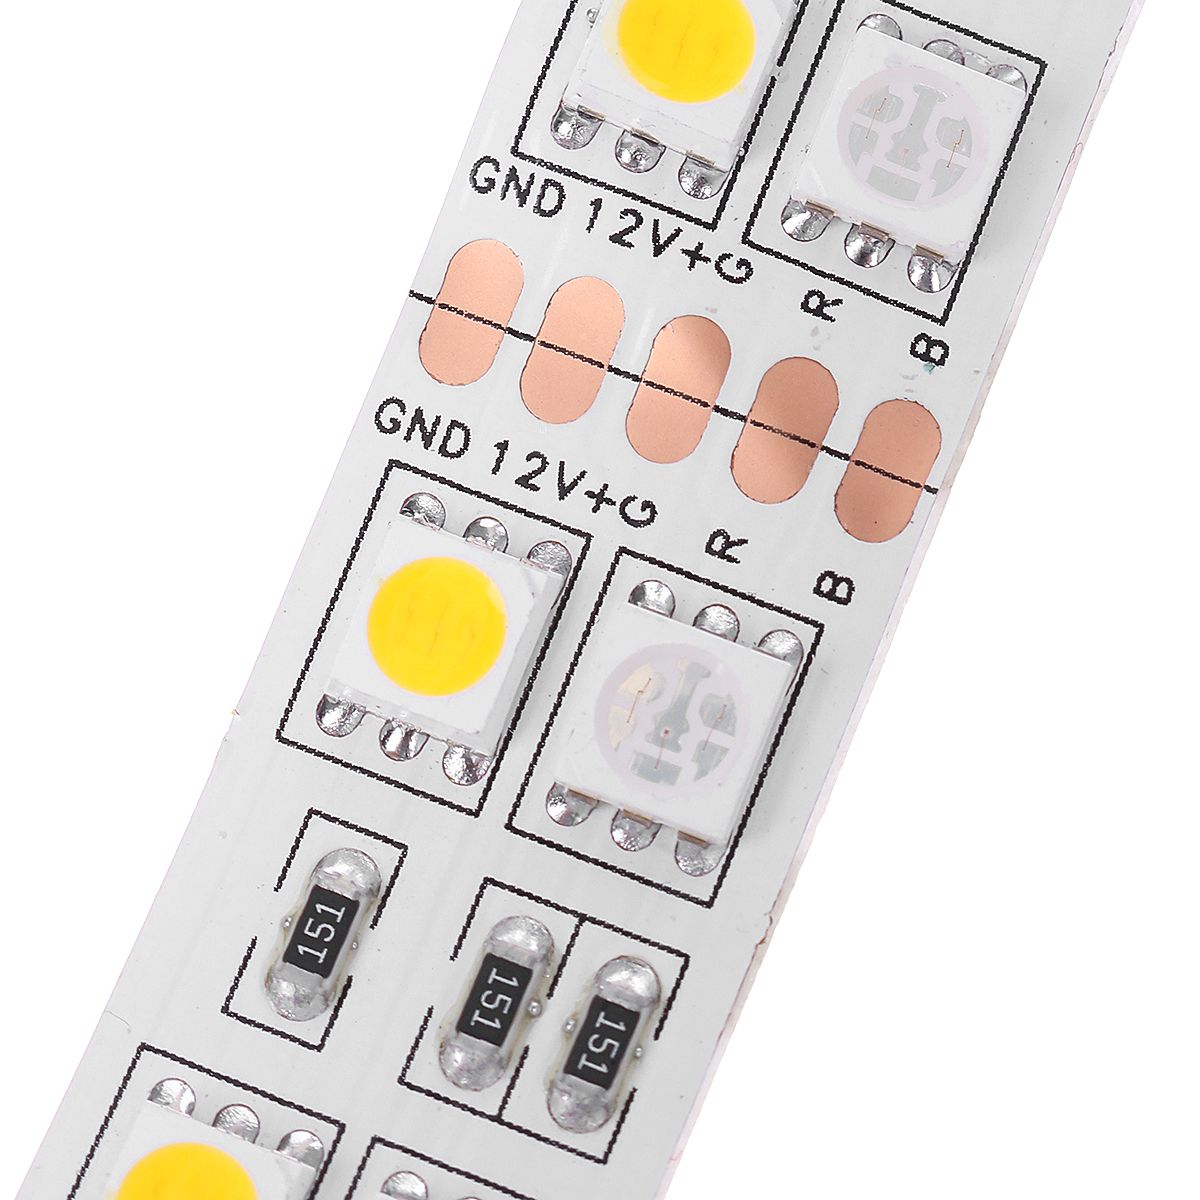 Double-Rows-Flexible-Non-waterproof-SMD5050-RGBWW-5M-600LED-Strip-Light-for-Indoor-Living-Room-Home--1531488